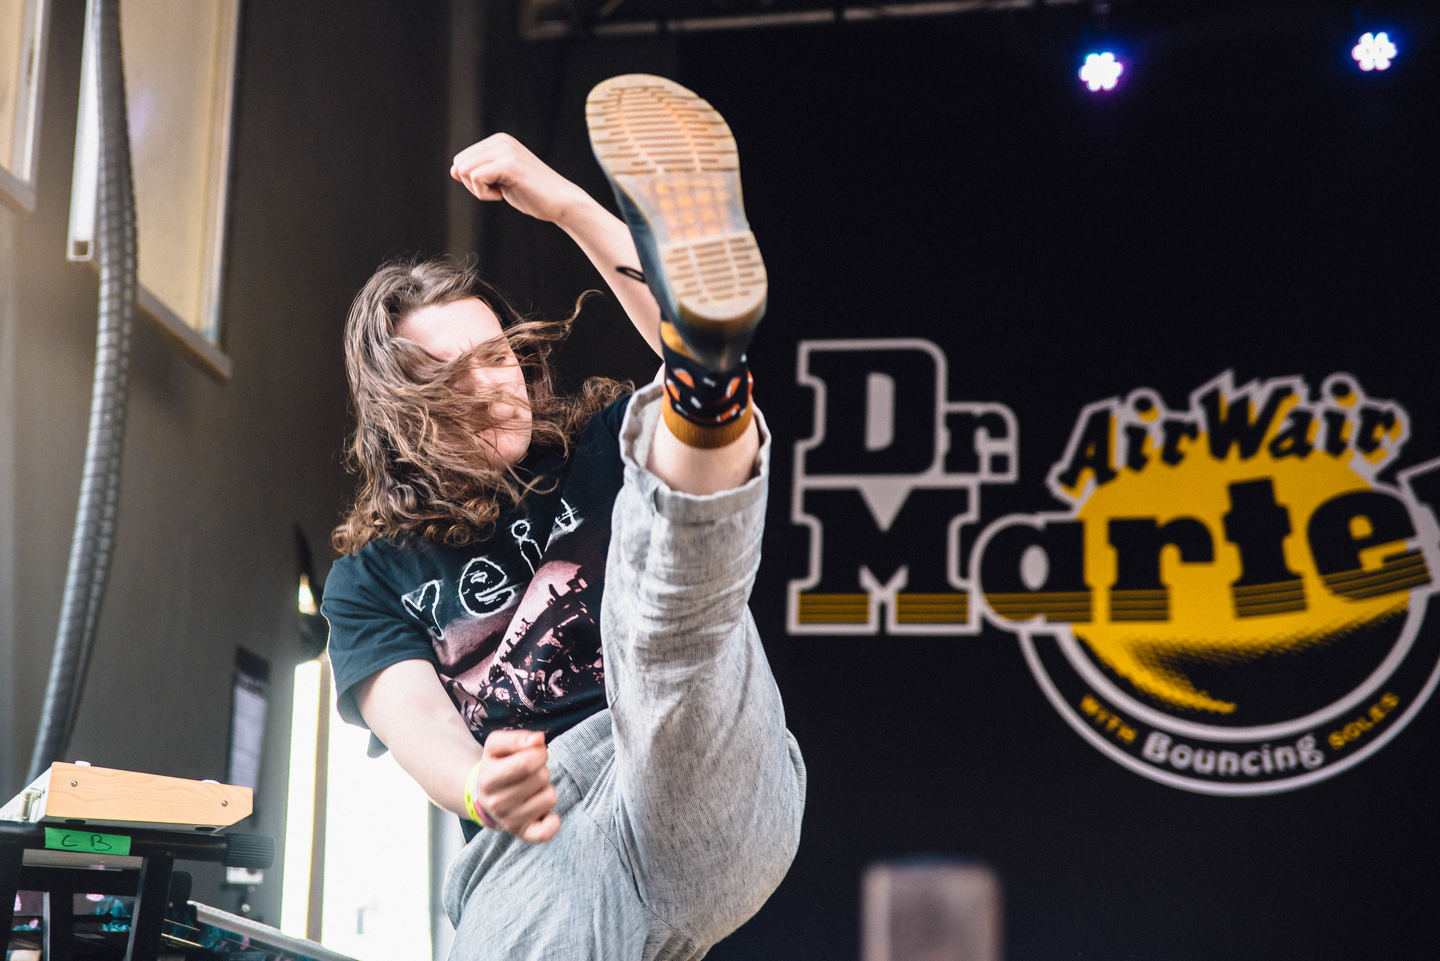 White Reaper was one of the bands at Wednesday afternoon’s Dr. Martens Presents: COLLiDE at Container Bar. Photo by Jordan Hefler